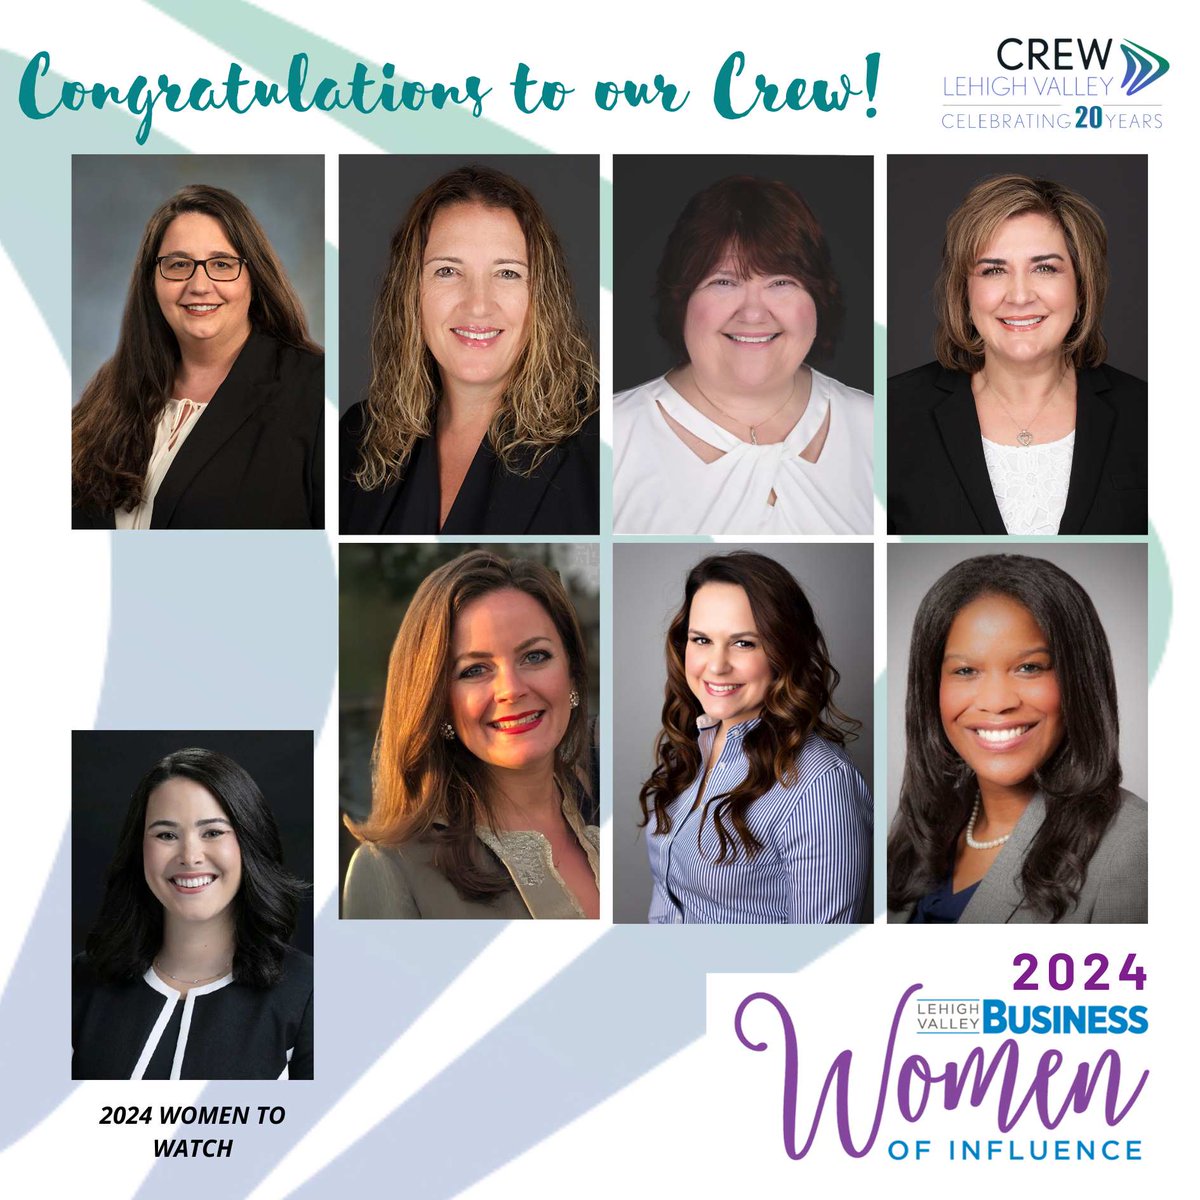 Congratulations to the phenomenal members of CREW Lehigh Valley who have been honored as Women of Influence by Lehigh Valley Business! 

#CREW_LV #WomenOfInfluence #GameChangers #LVB #LehighValley #CRE #PhiladelphiaCRE